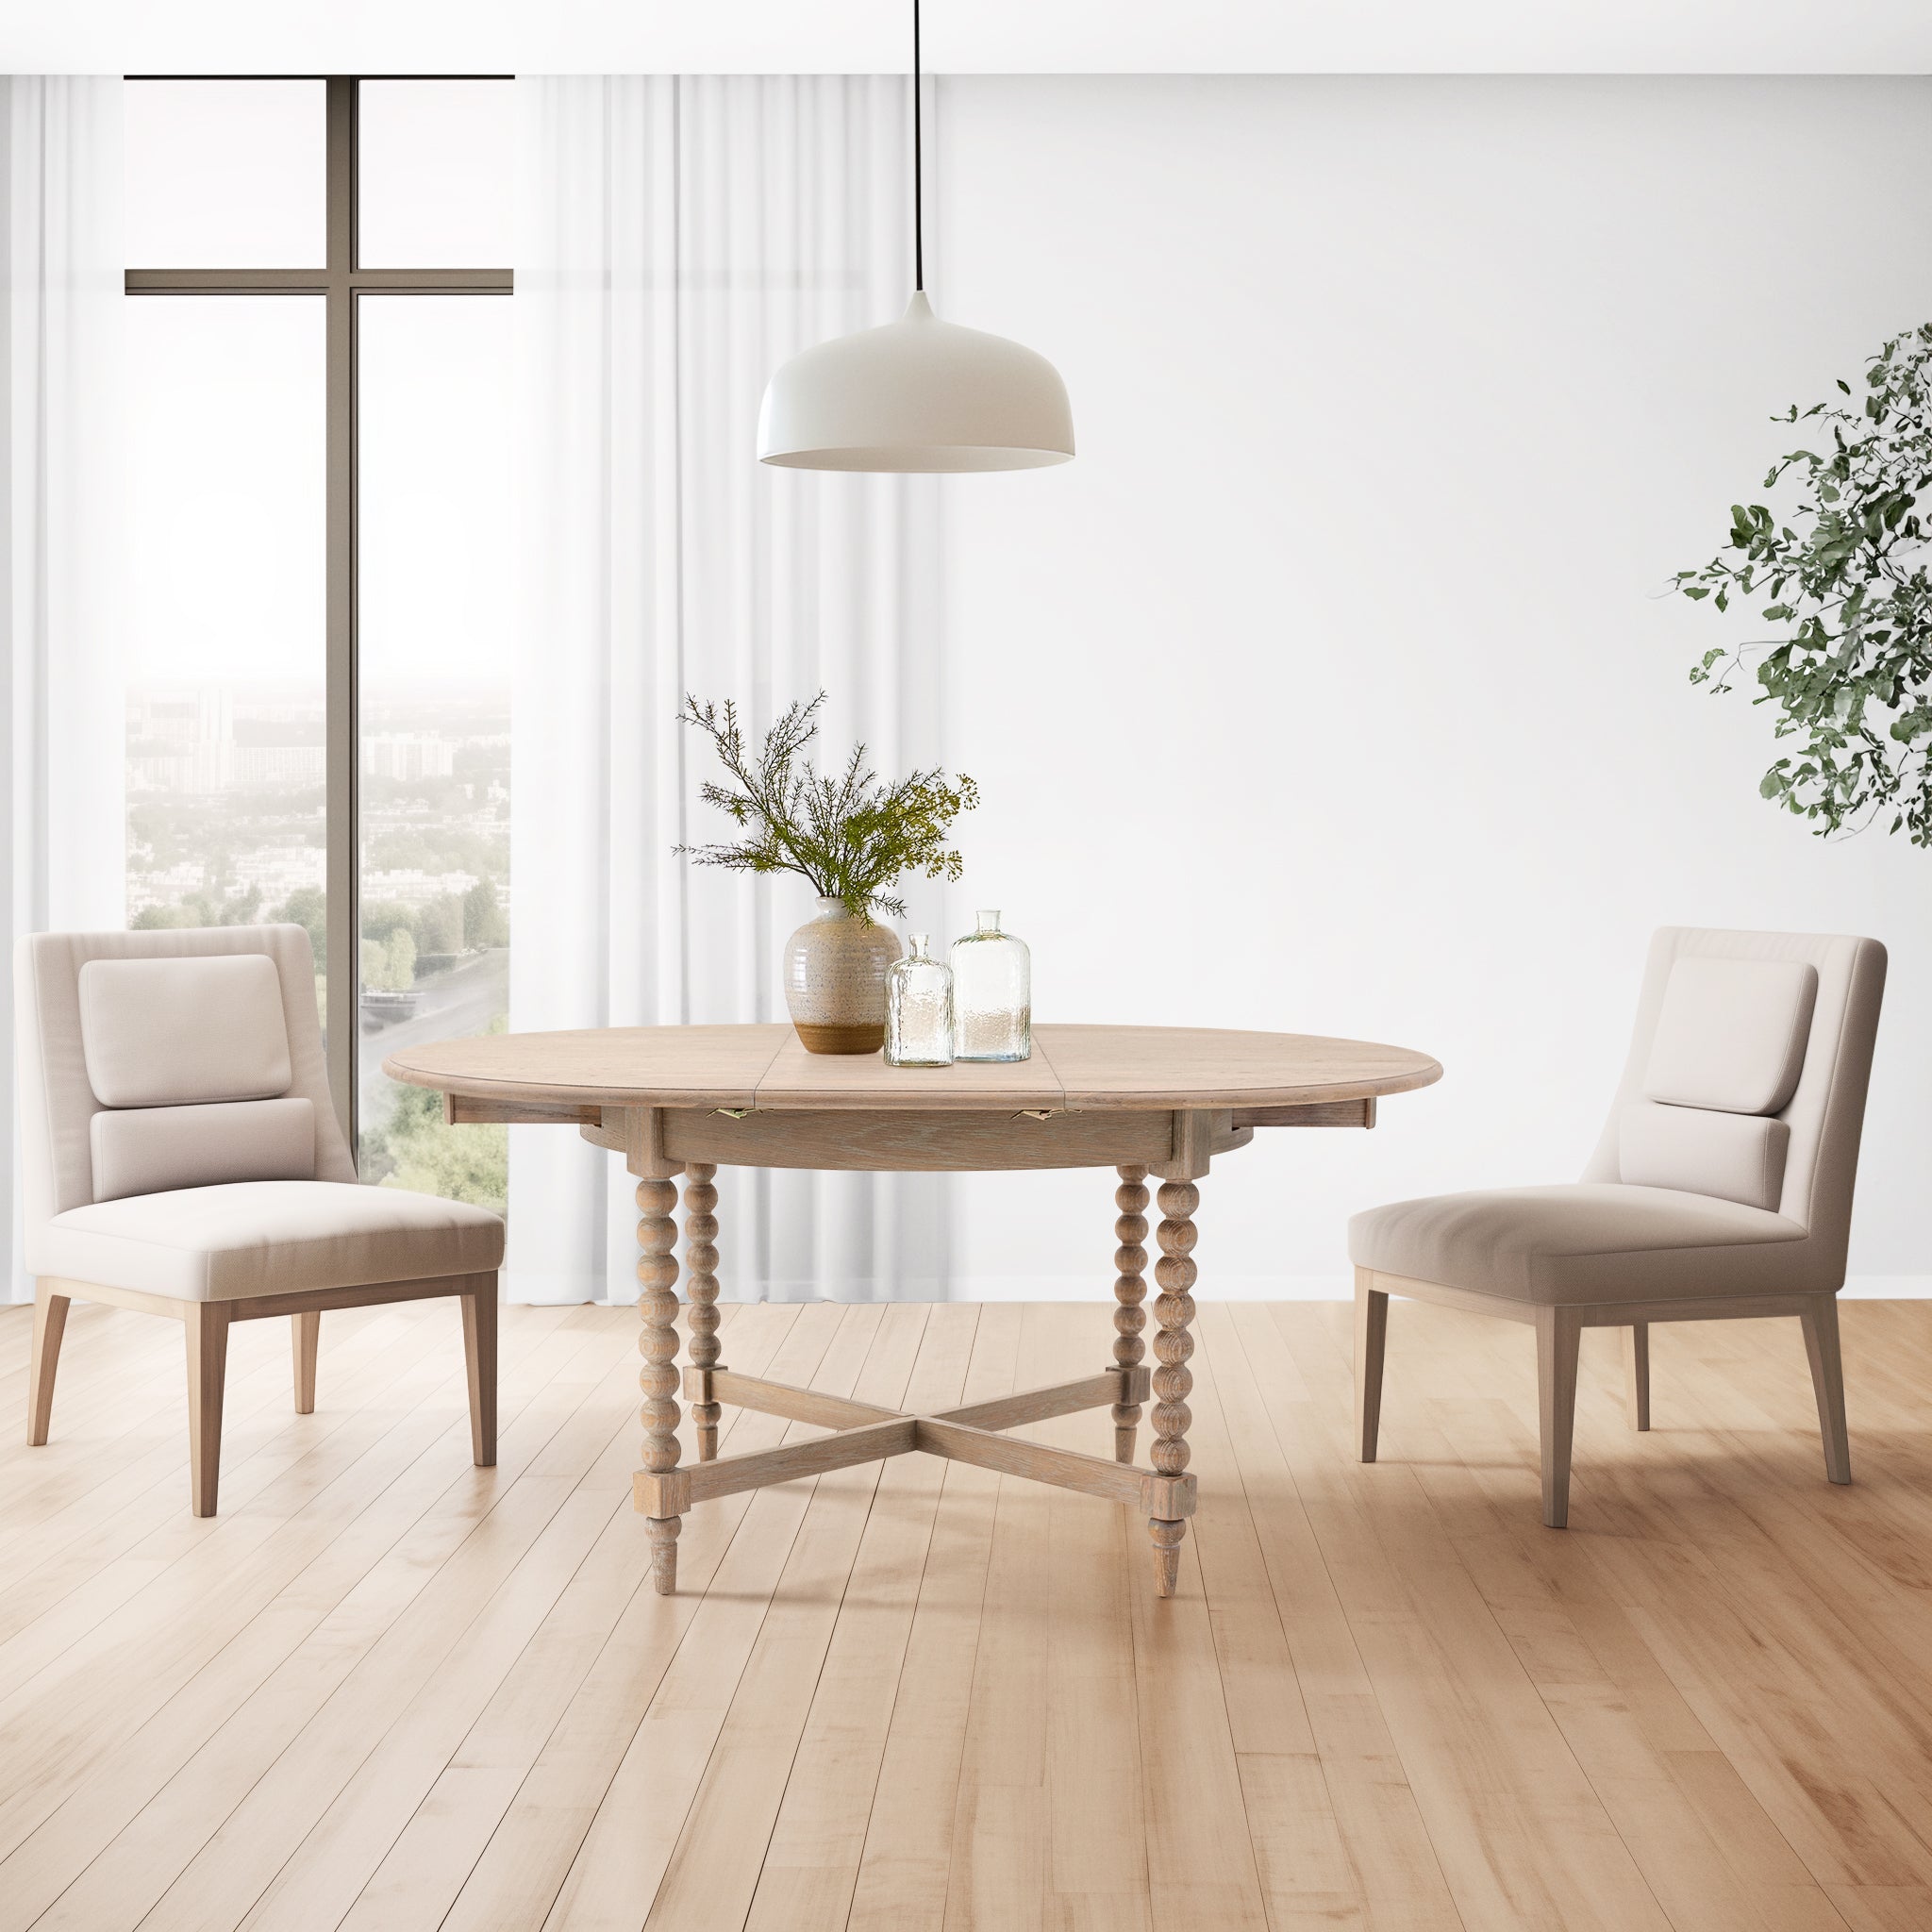 The Bobbin Extendable Dining Table